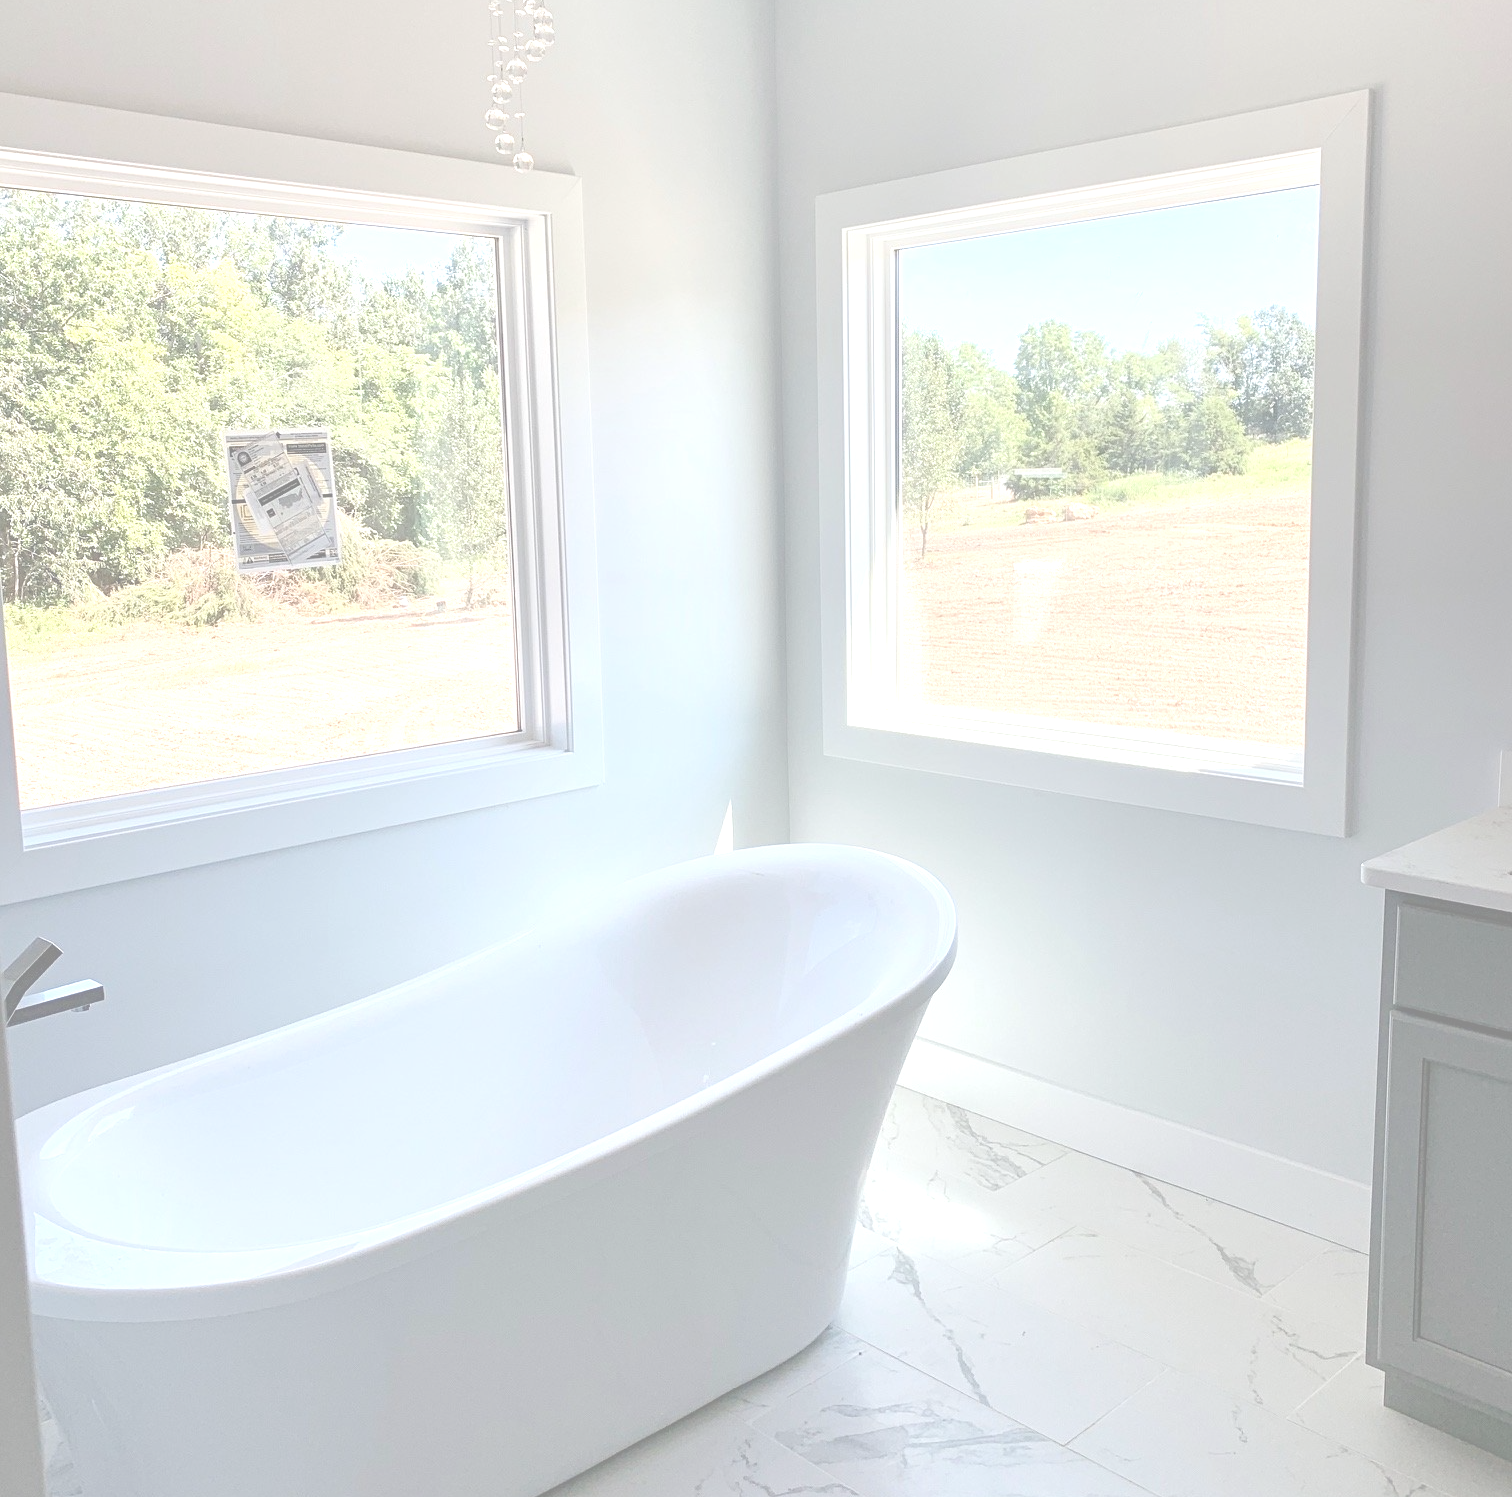 Watts Construction Can Design & Build Exciting Custom Features for Your Mid-Missouri Bathroom